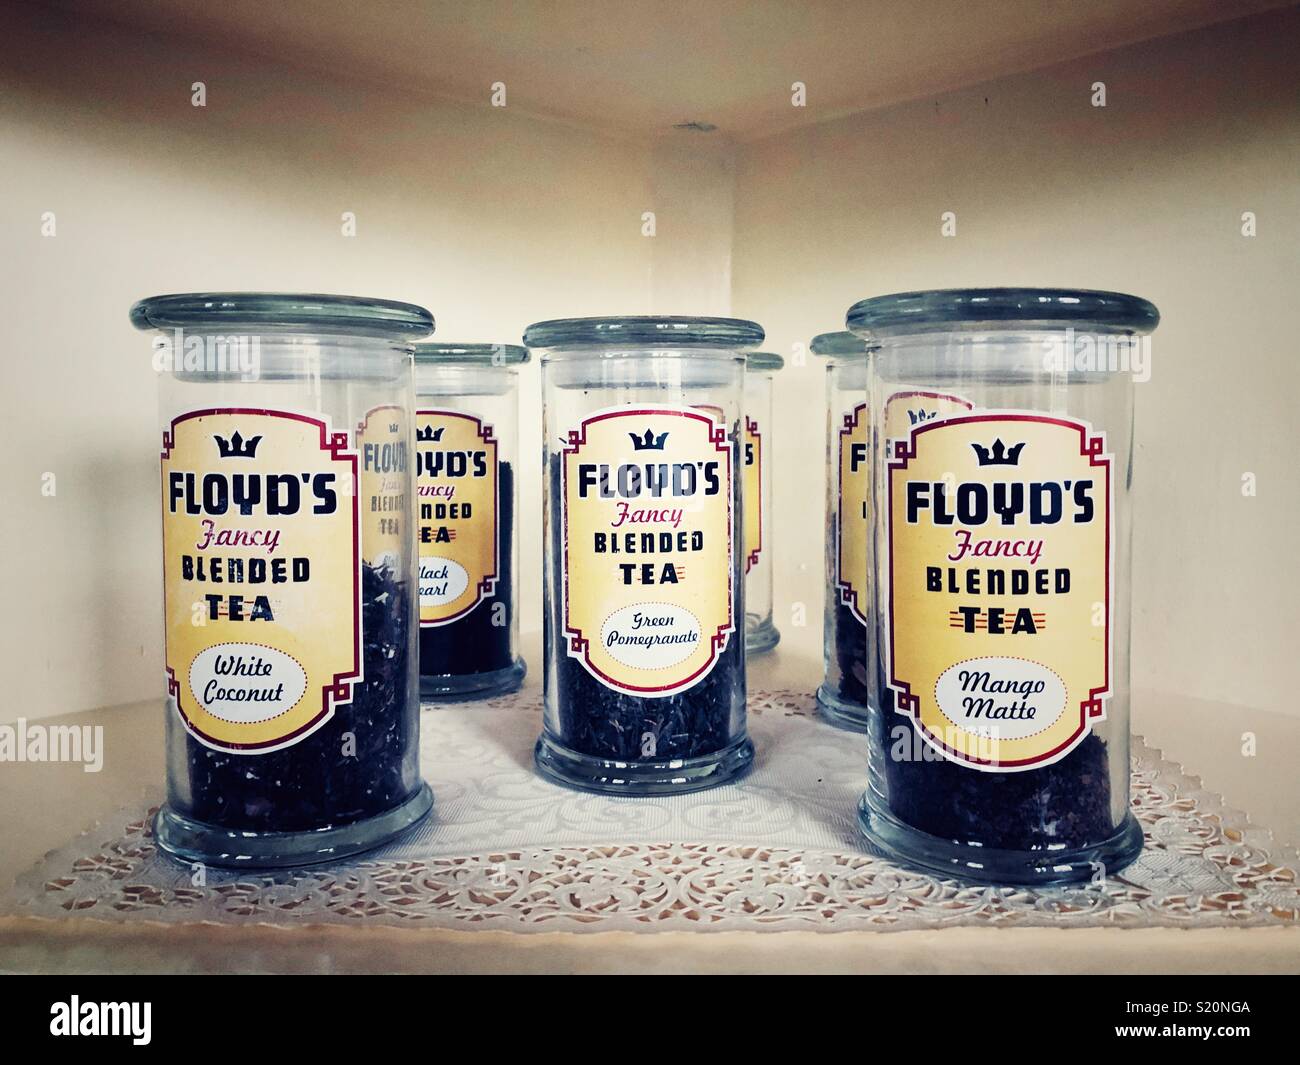 Fancy Floyd’s blended teas in vintage glass containers on a shelf Stock Photo